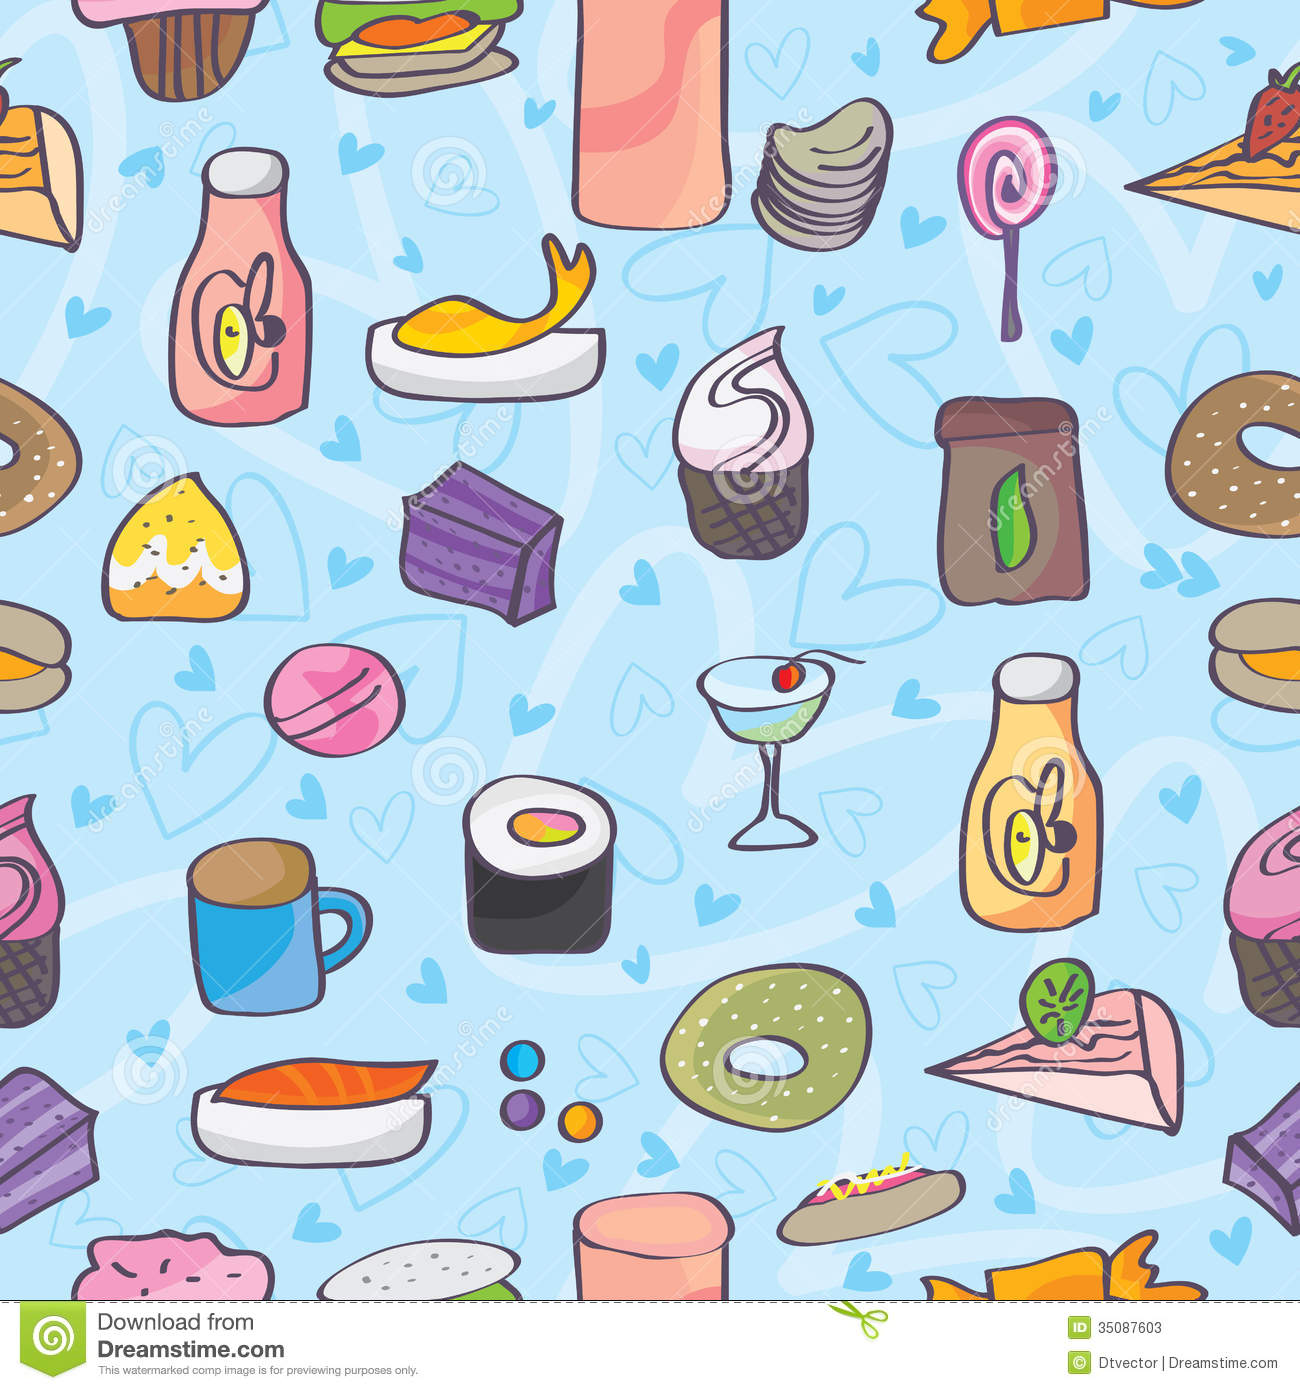 Snack Food Love Doodle Seamless Pattern Eps Stock Photos   Image